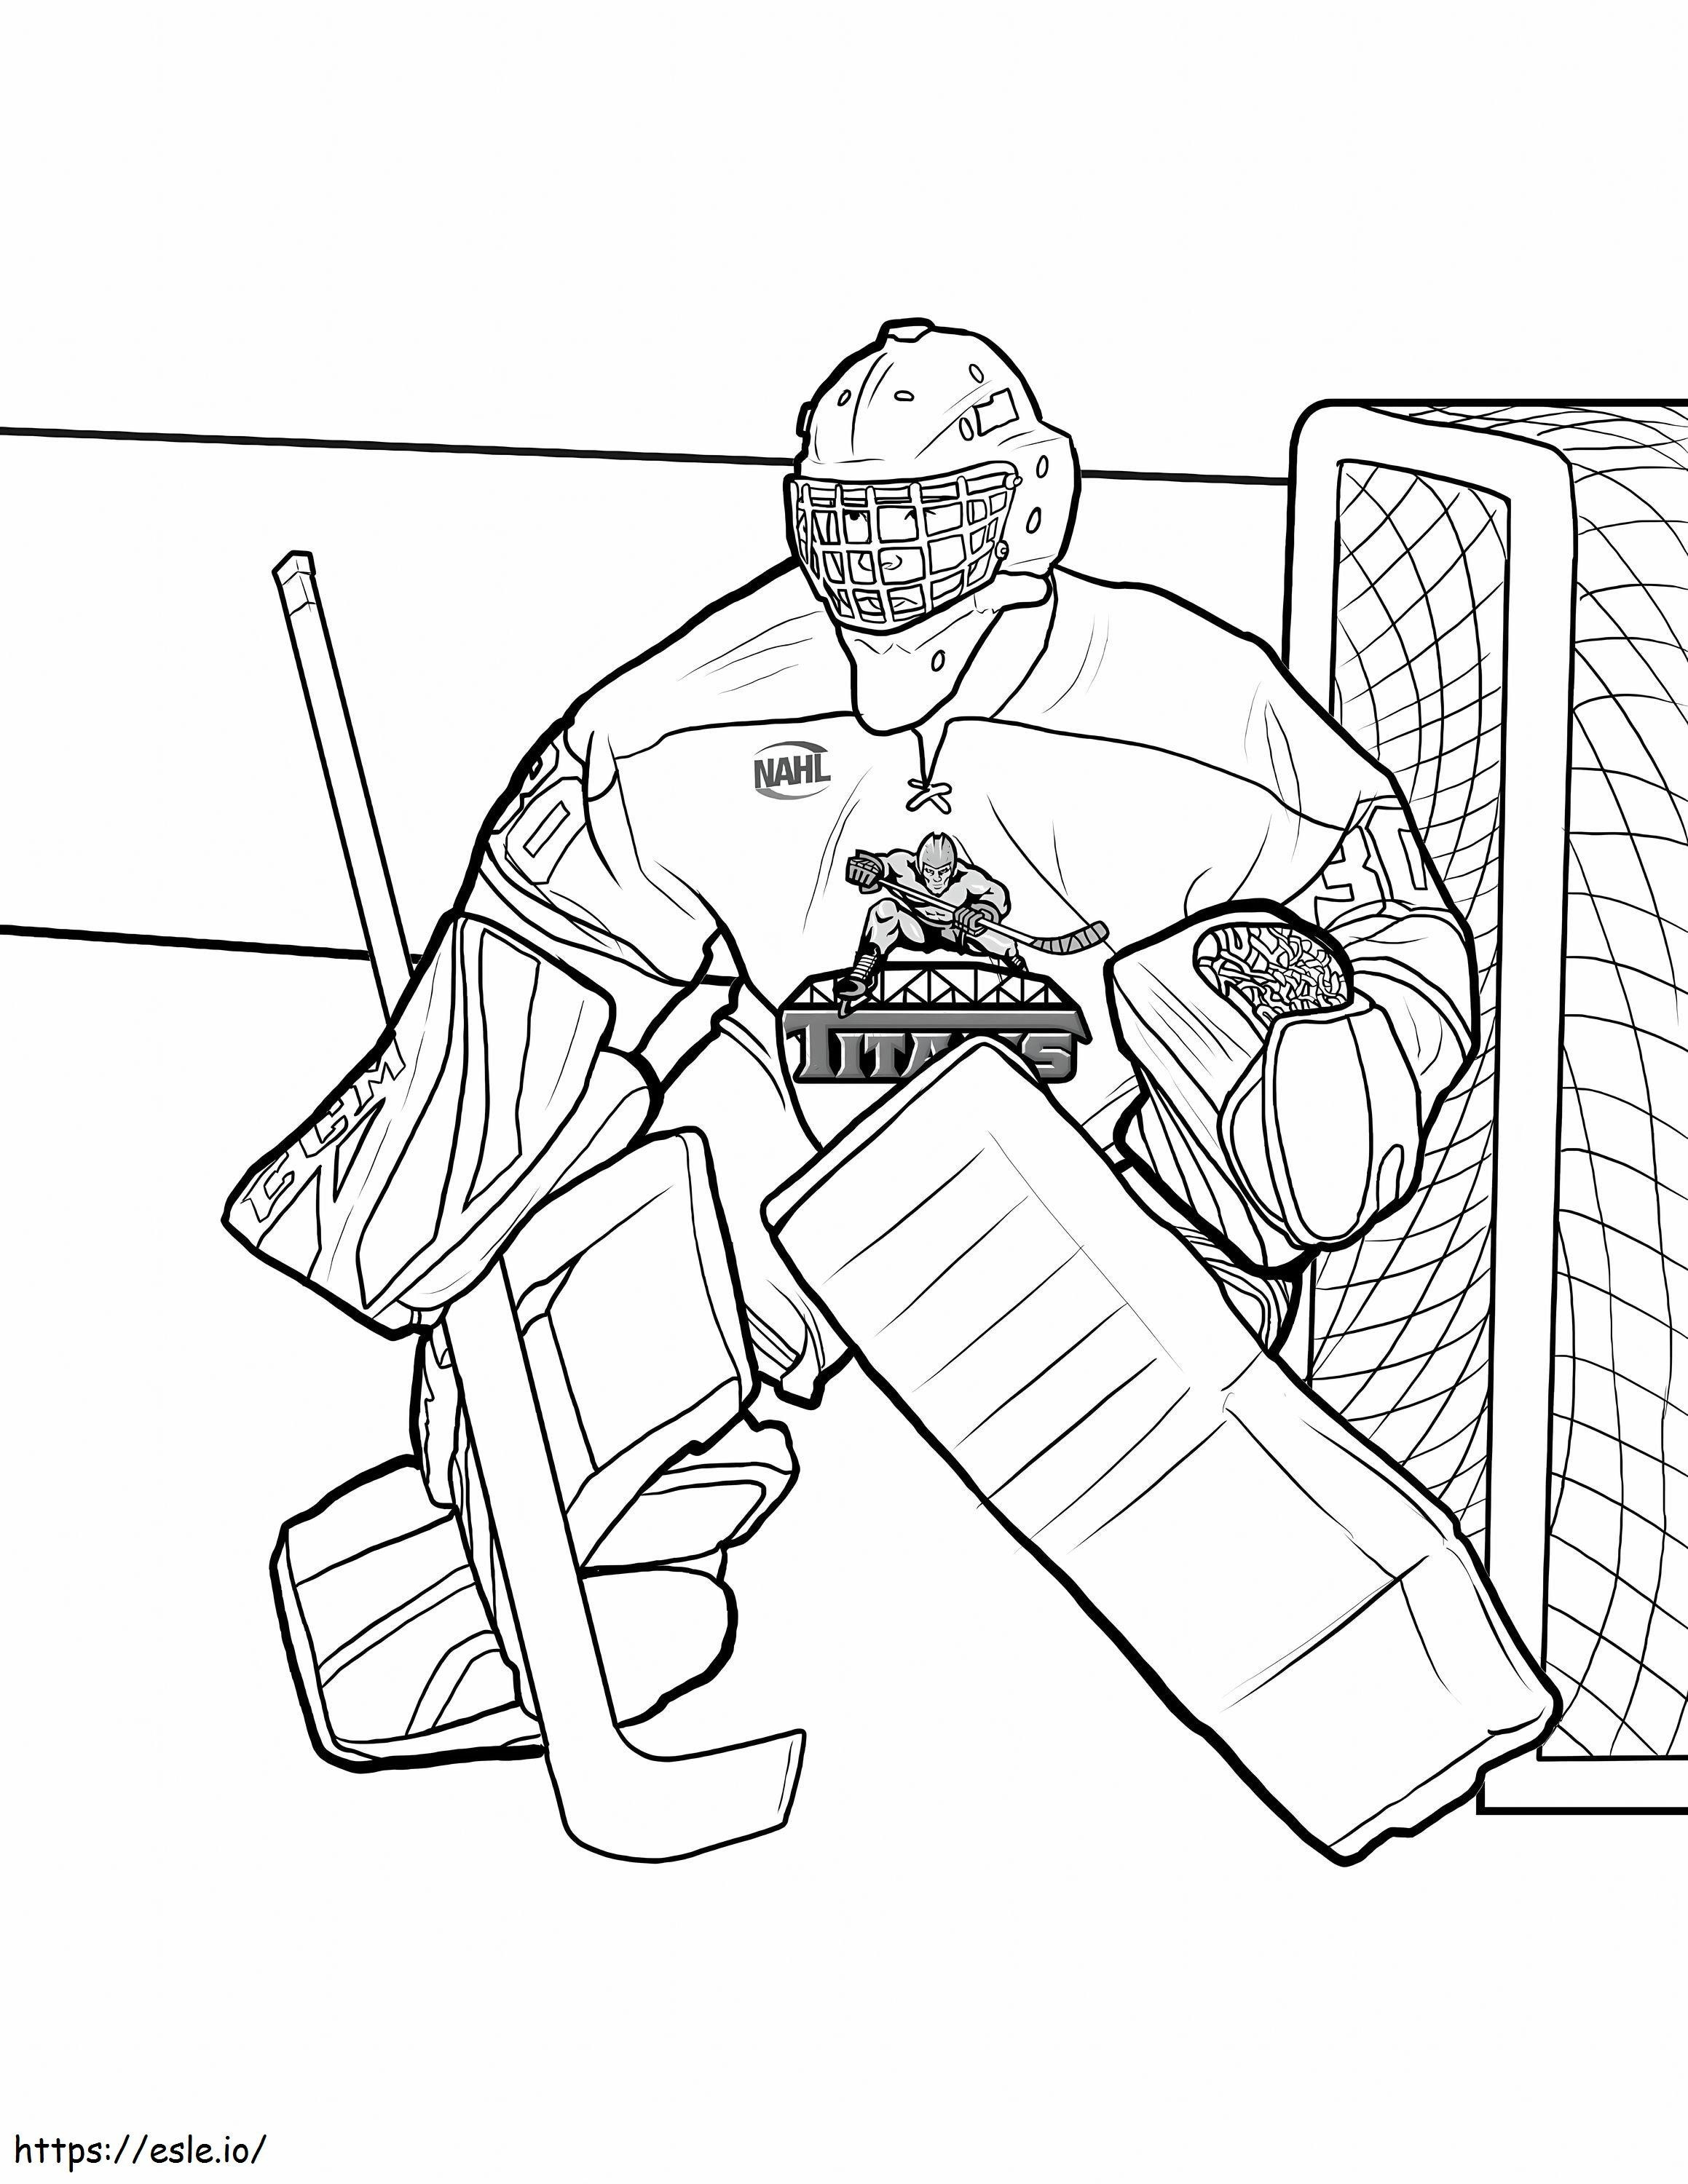 Basic Hockey Player coloring page